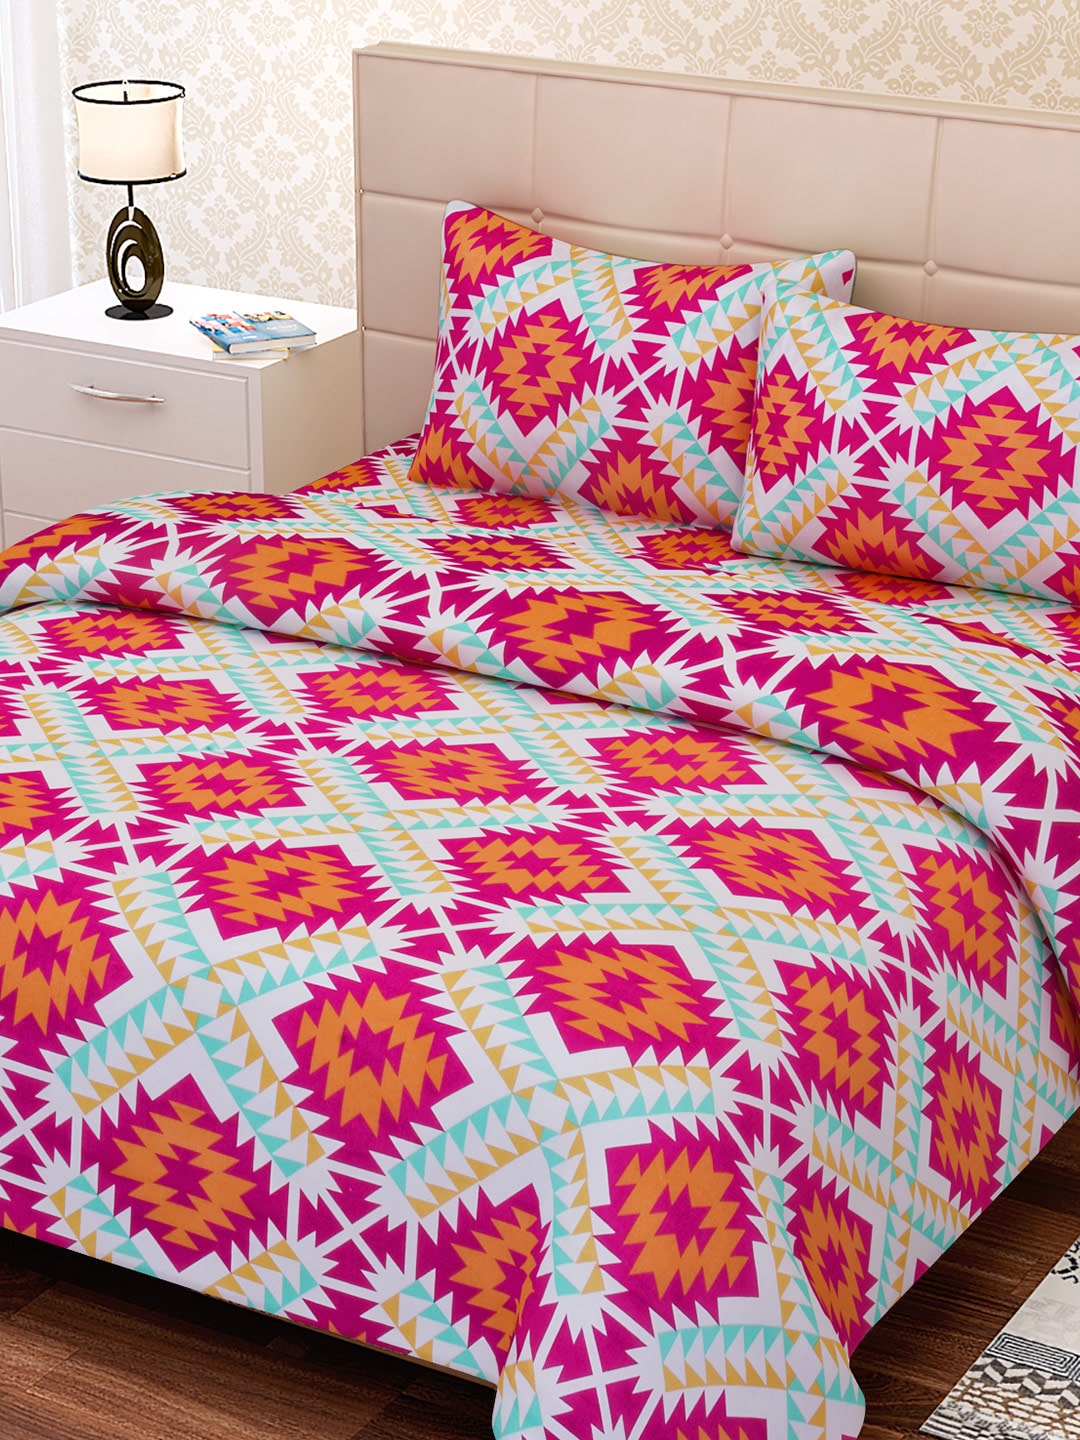 SEJ by Nisha Gupta Pink & Orange 144 TC Cotton Double Bedsheet with 2 Pillow Covers Price in India